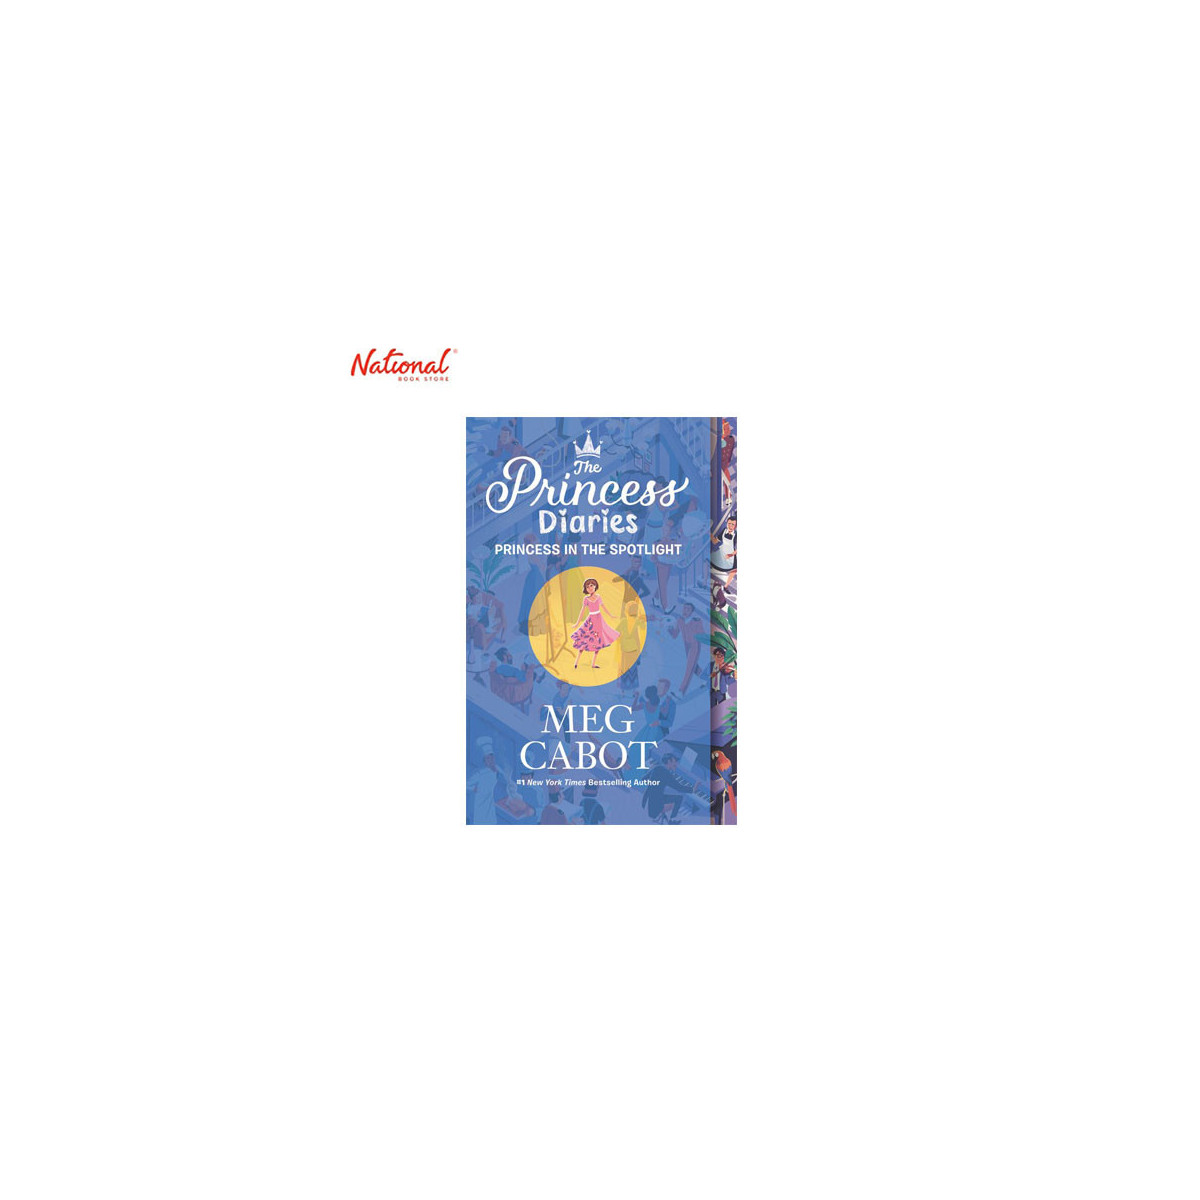 The Princess Diaries Volume II: Princess in the Spotlight Trade Paperback by Meg Cabot